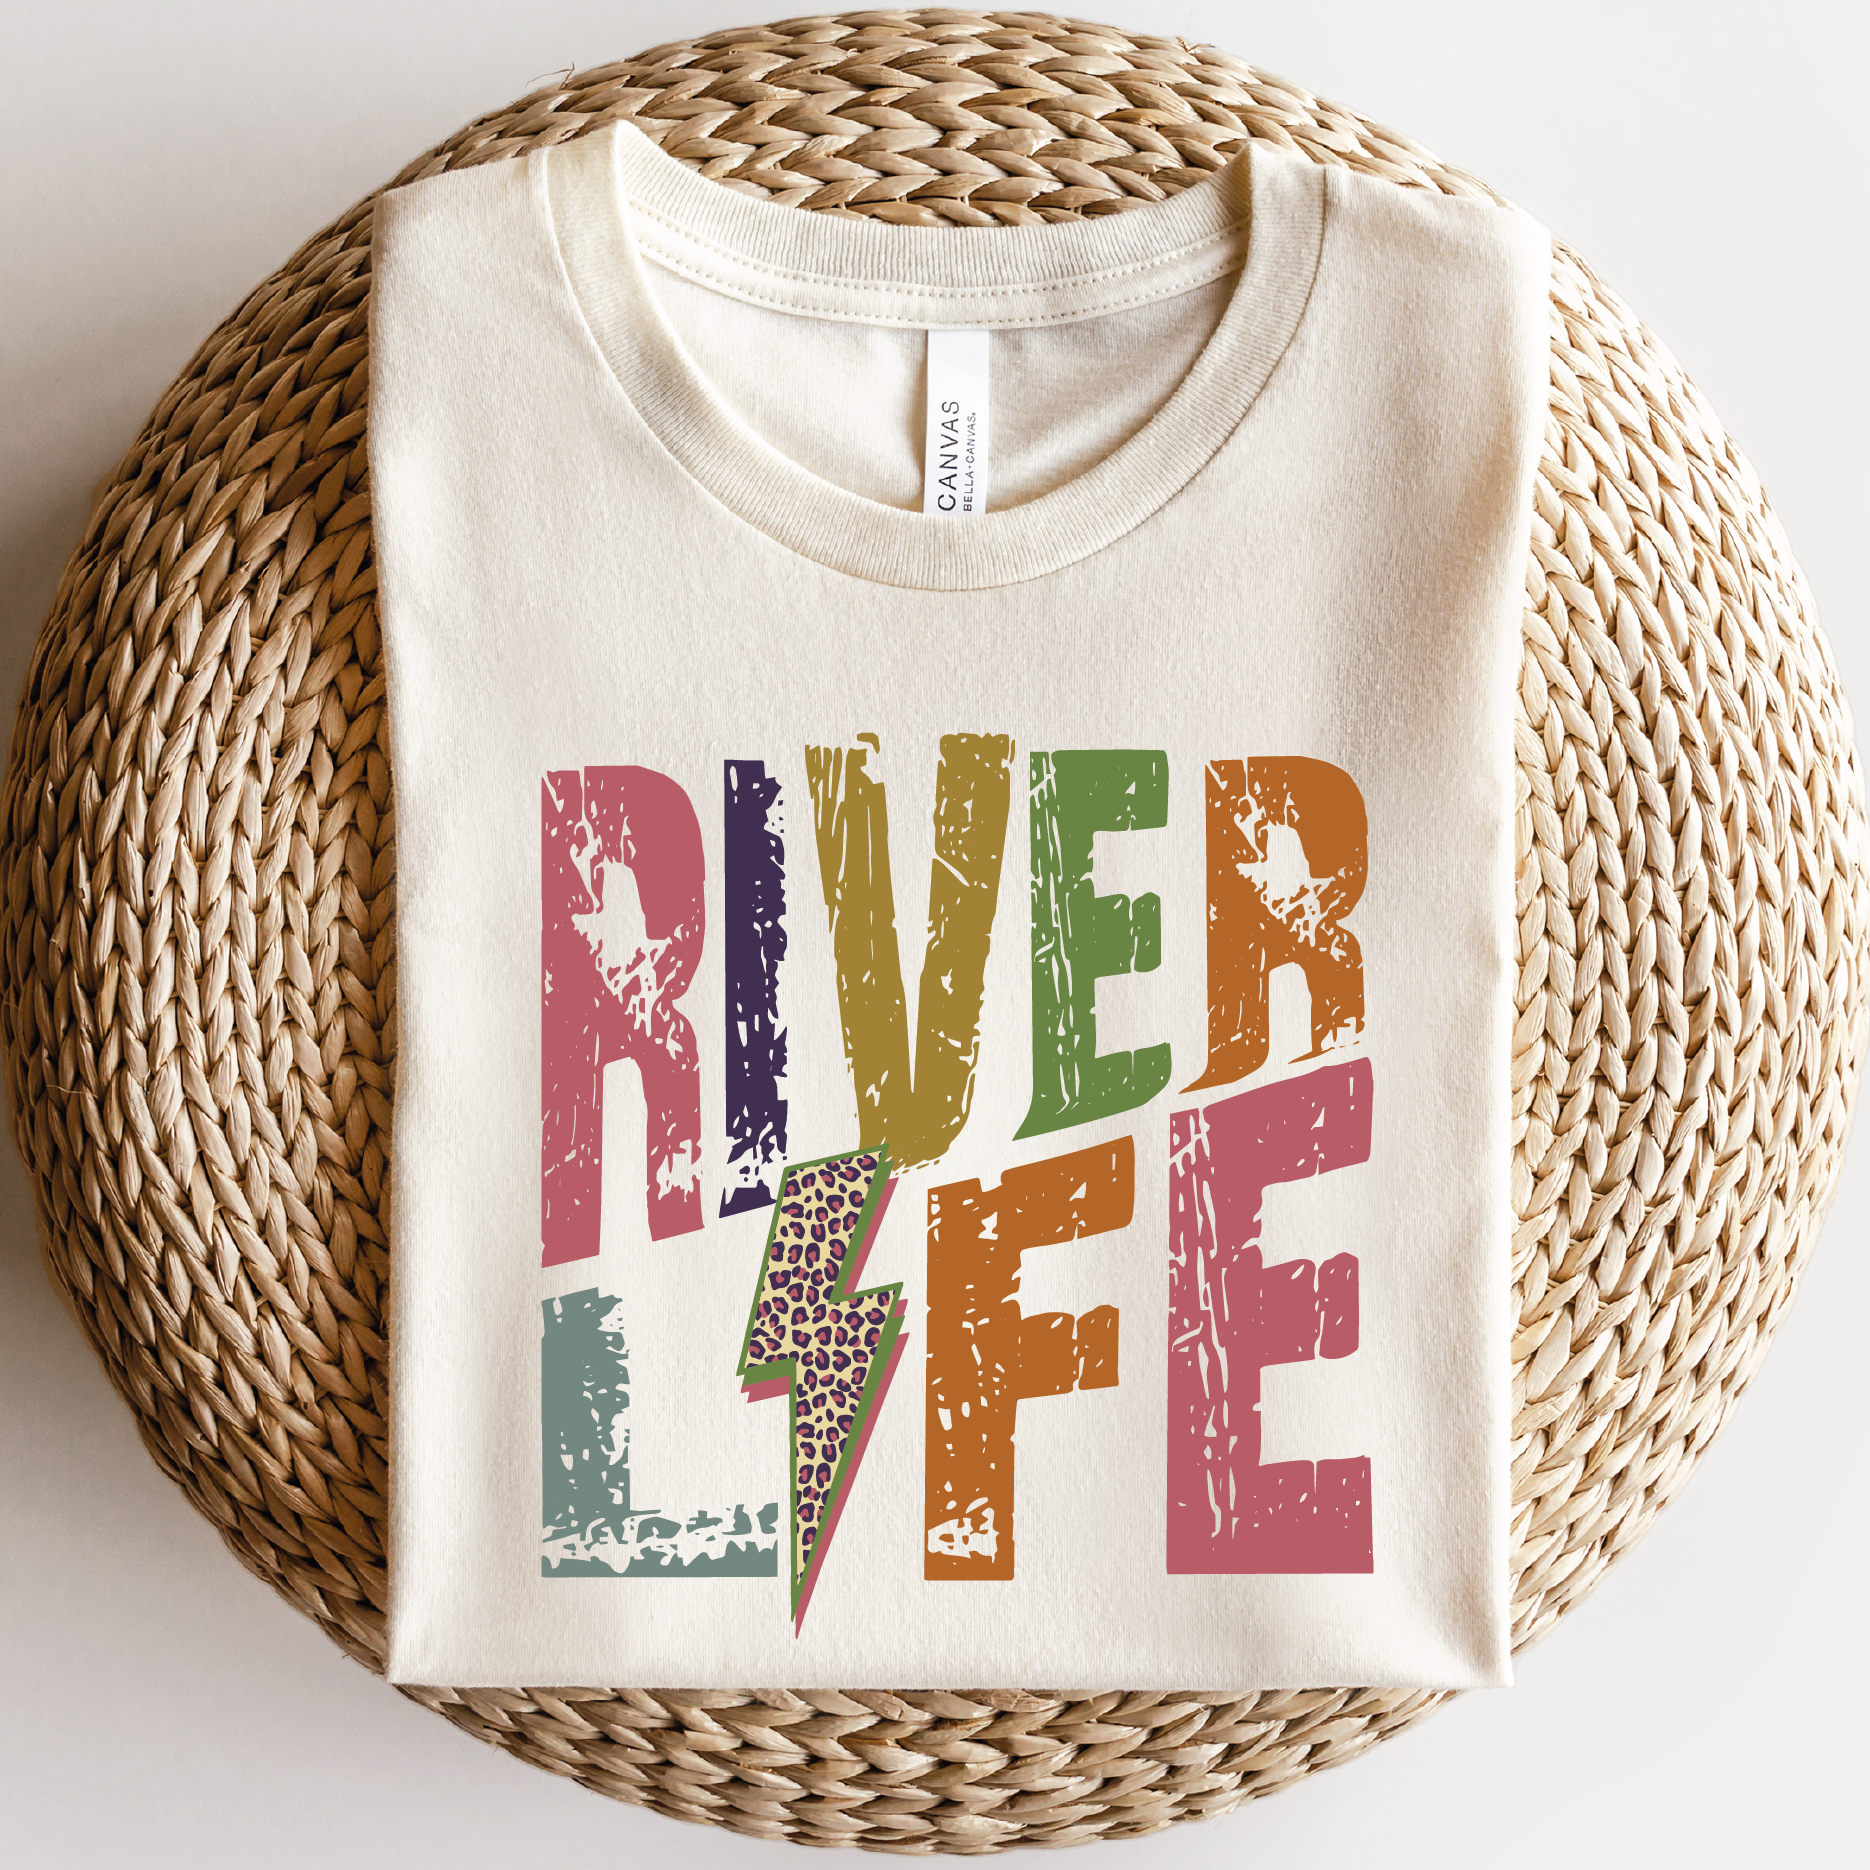 a white shirt that says river life on it